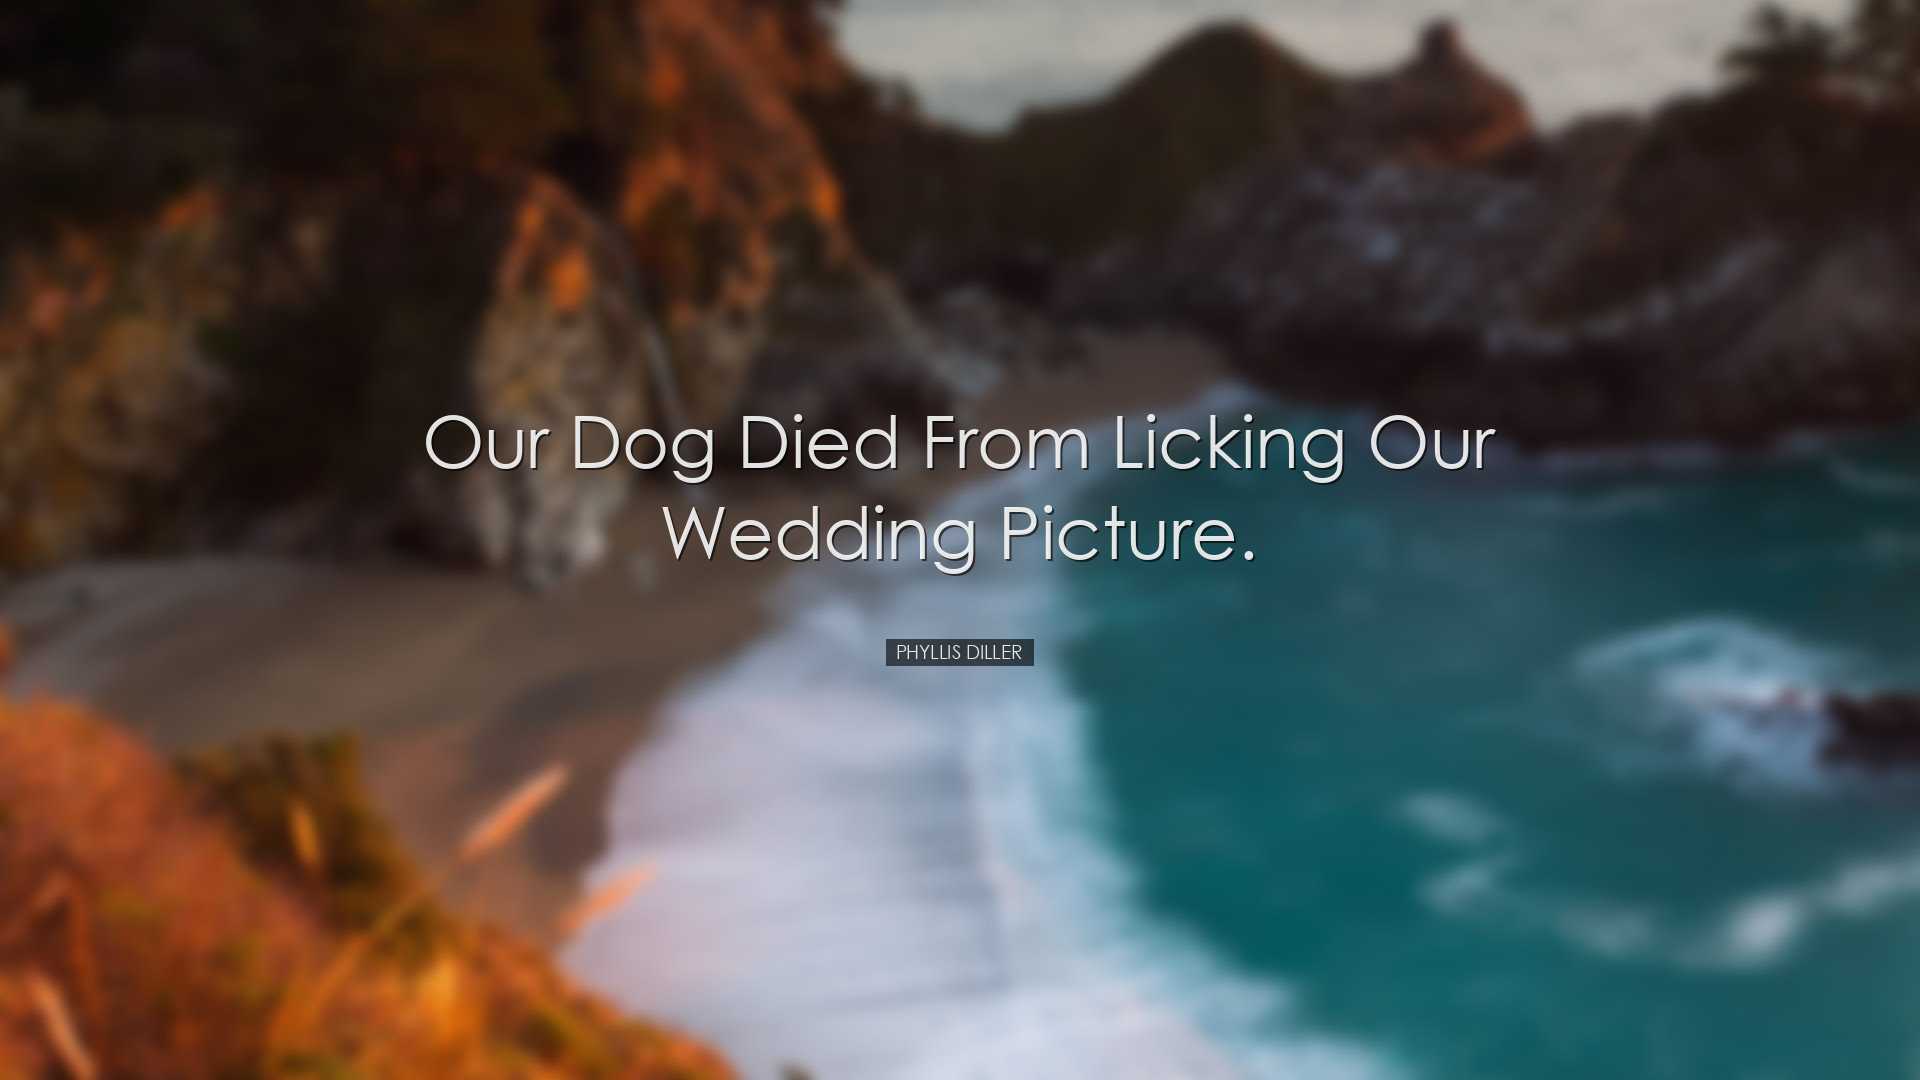 Our dog died from licking our wedding picture. - Phyllis Diller